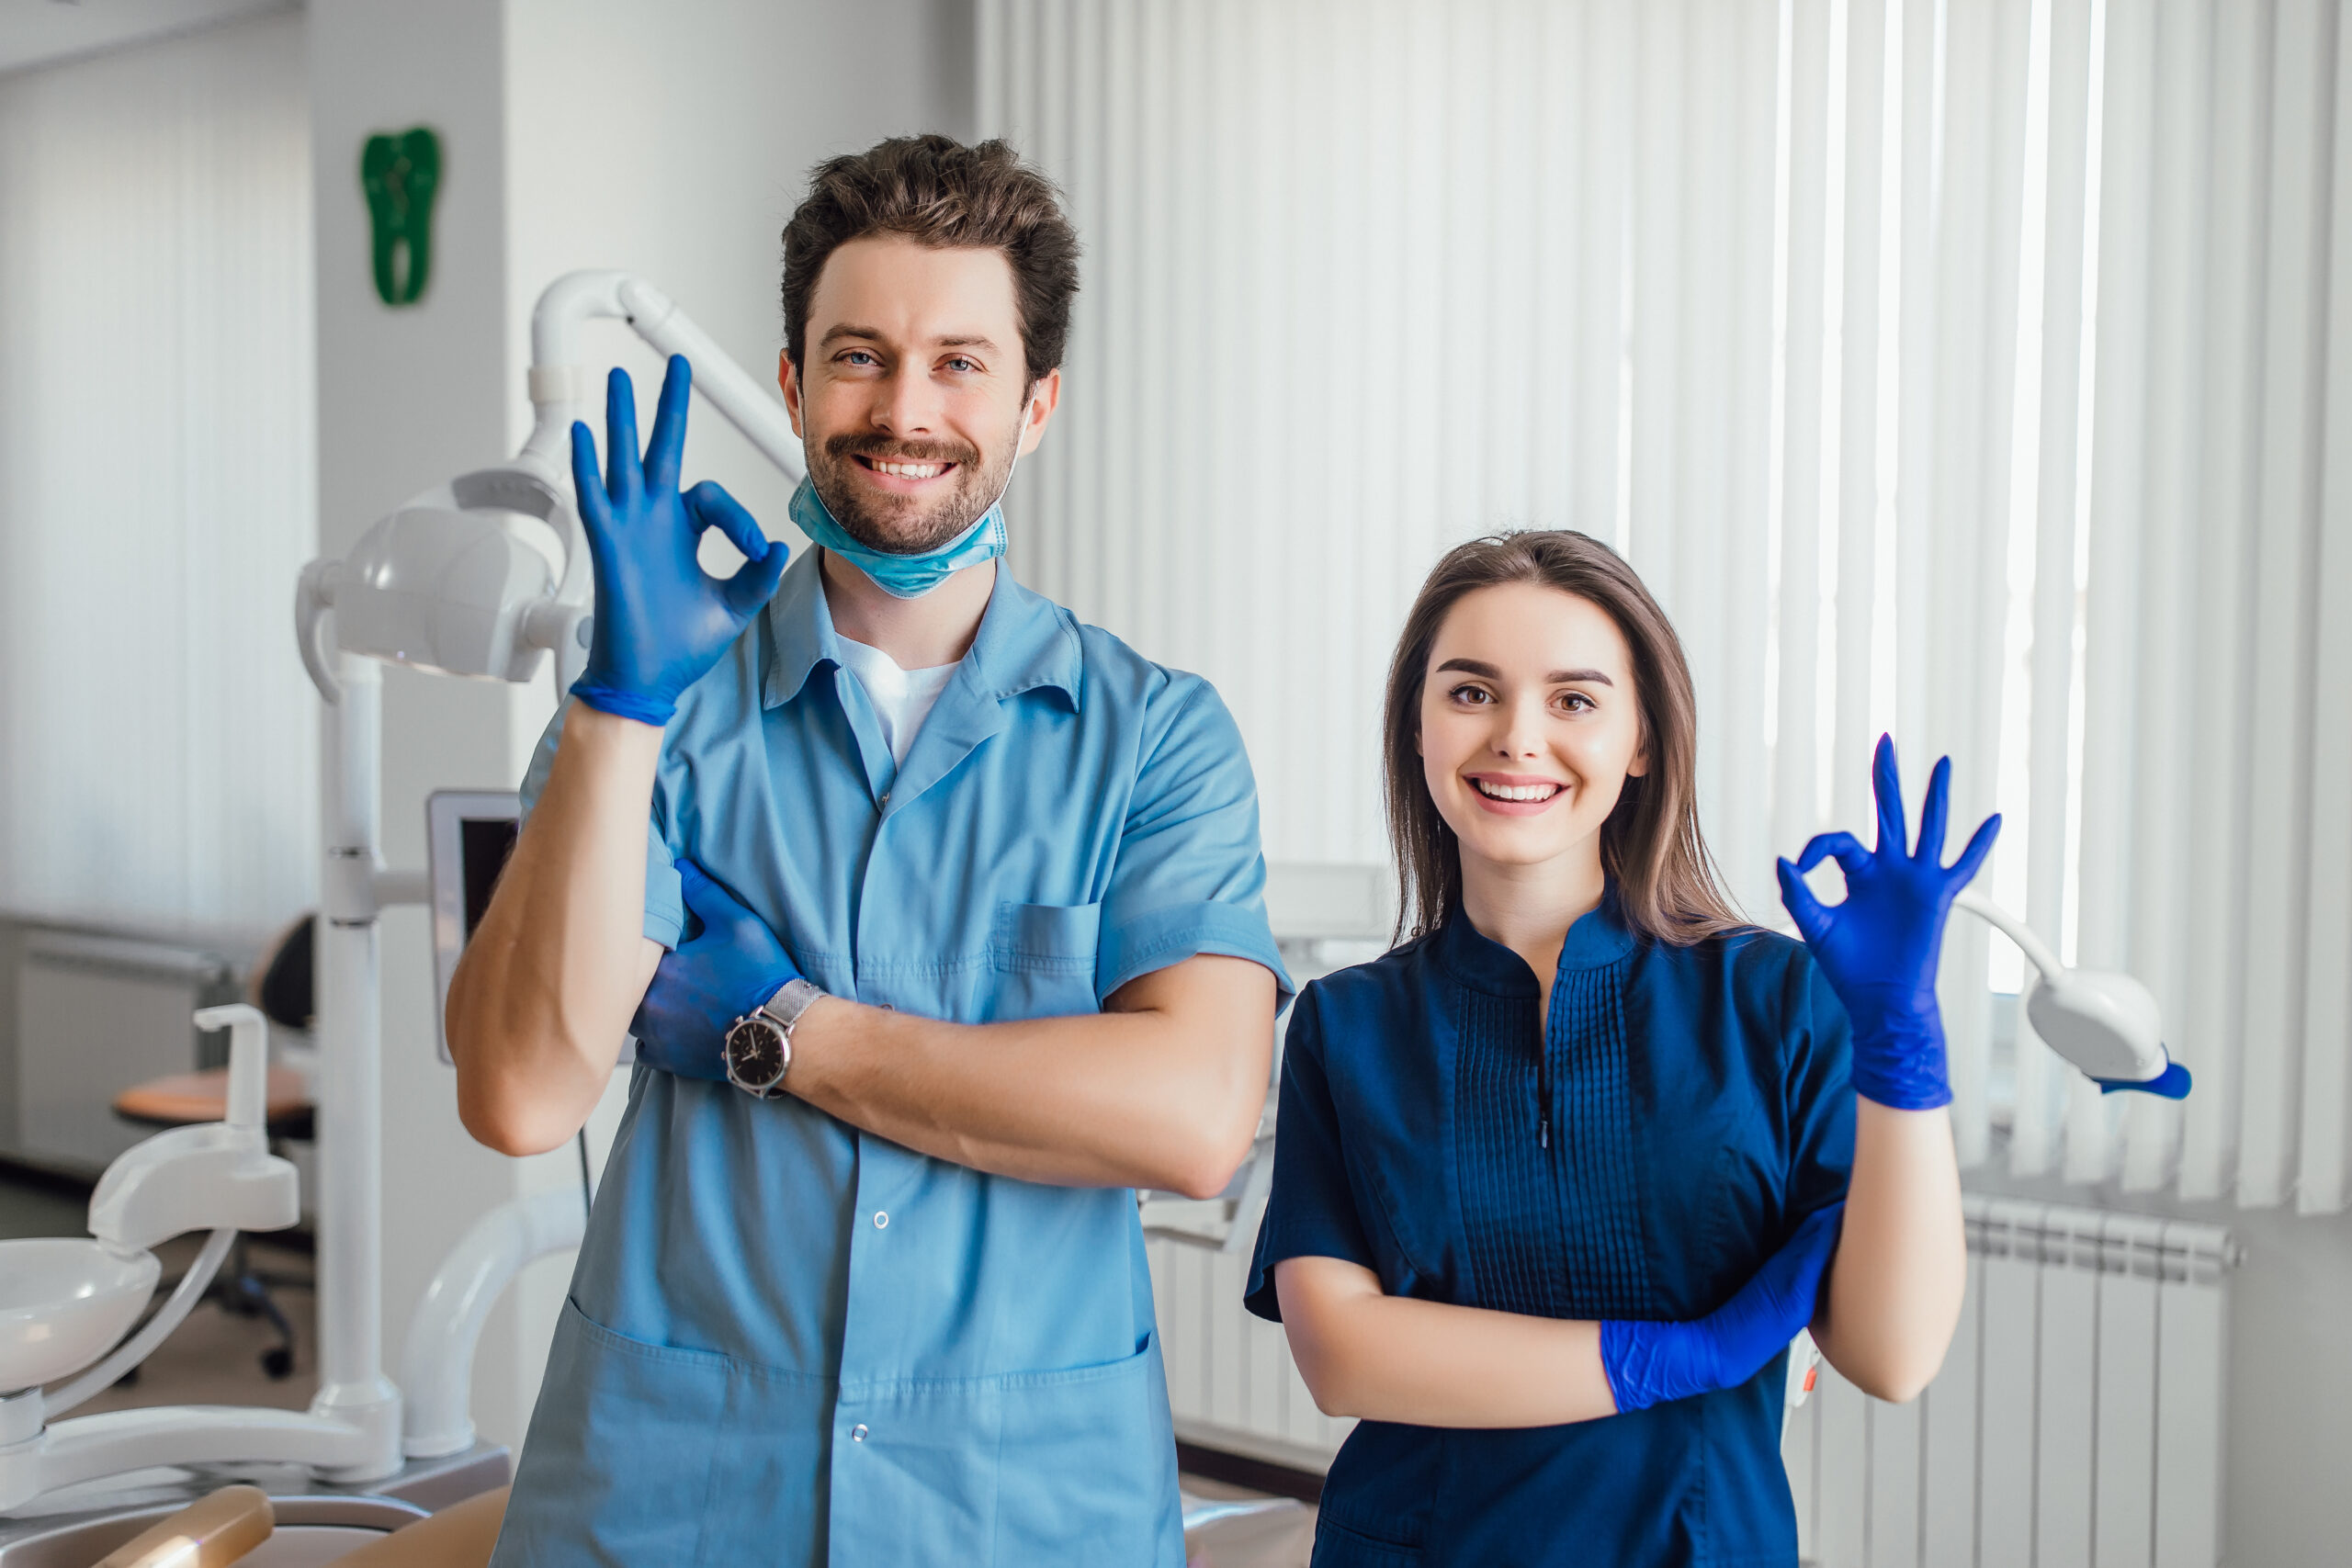 photo-of-smiling-dentist-standing-with-arms-crossed-with-her-colleague-showing-okay-sign